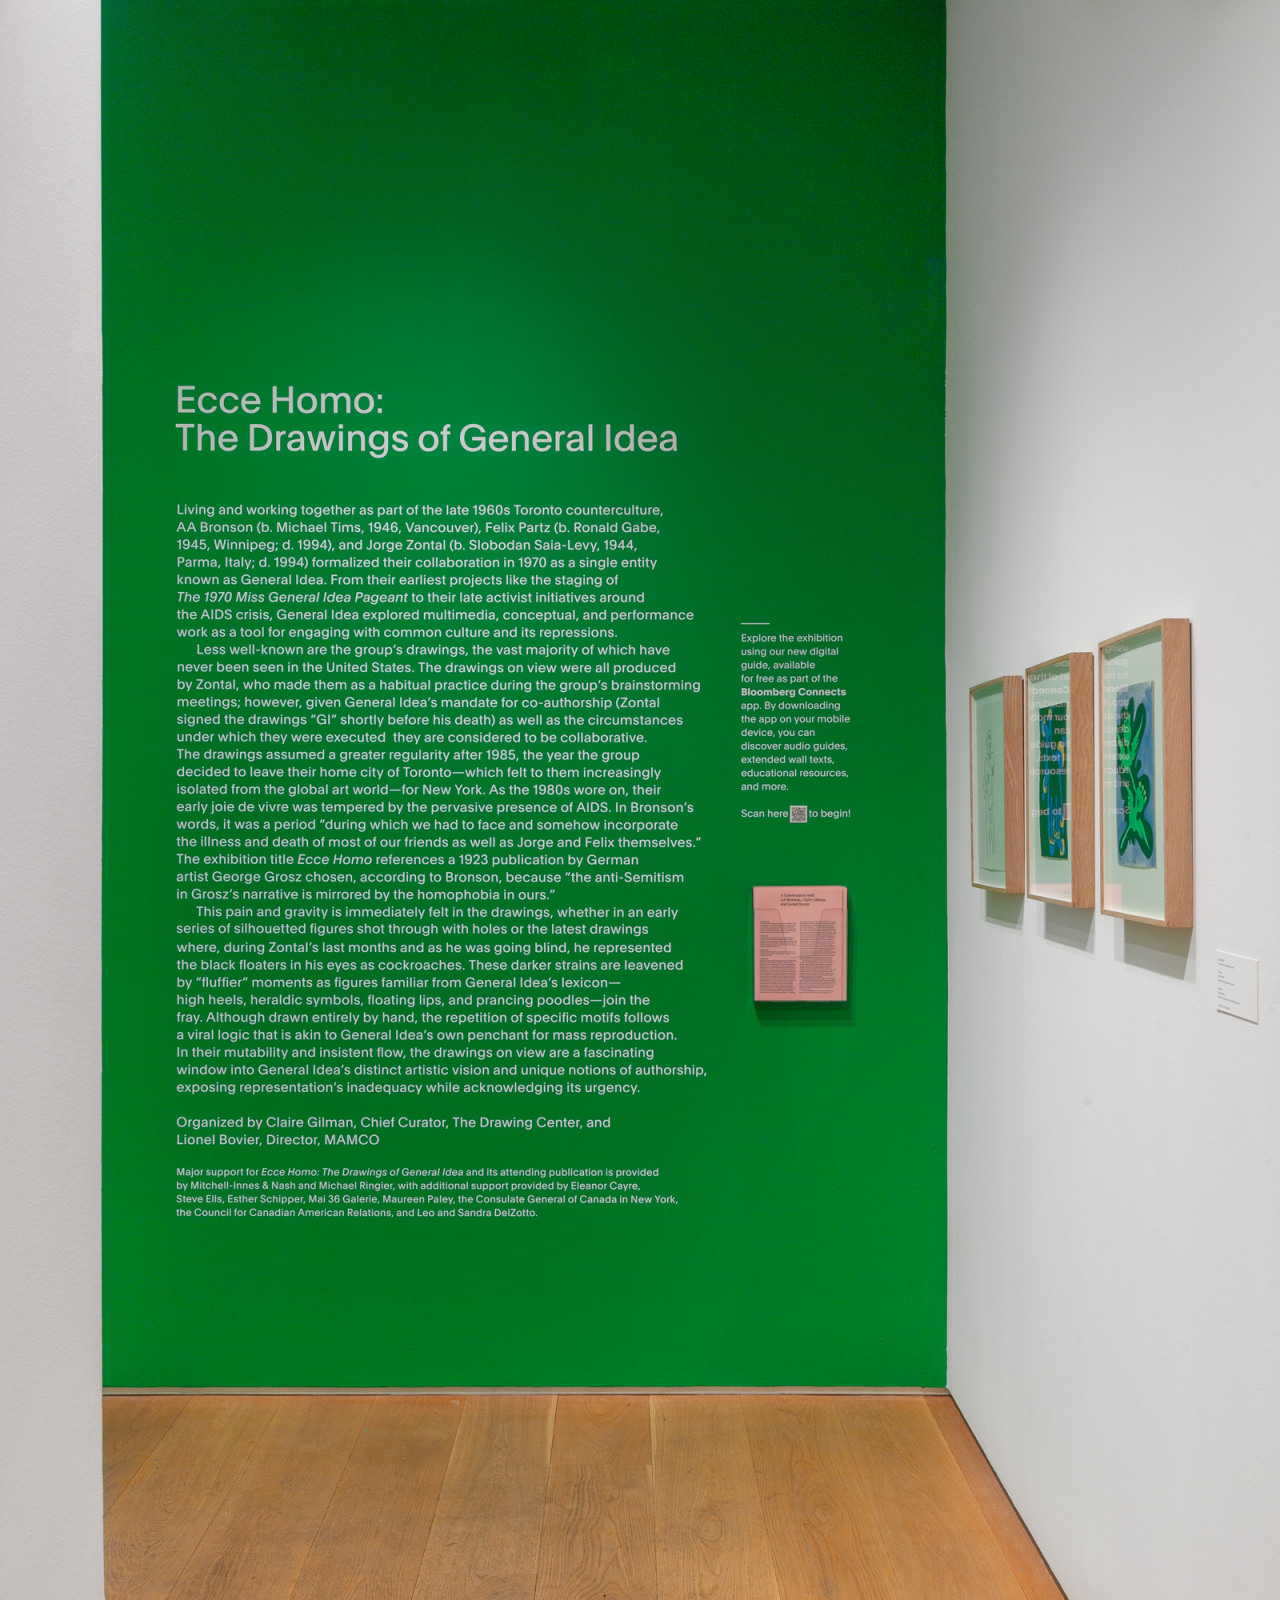 <div class="image_caption_container"><div class="image_caption"><p>Exhibition view: <strong>Ecce Homo: The Drawings of General Idea</strong>, The Drawing Center, New York, 2022. Photo © Daniel Terna</p></div></div>